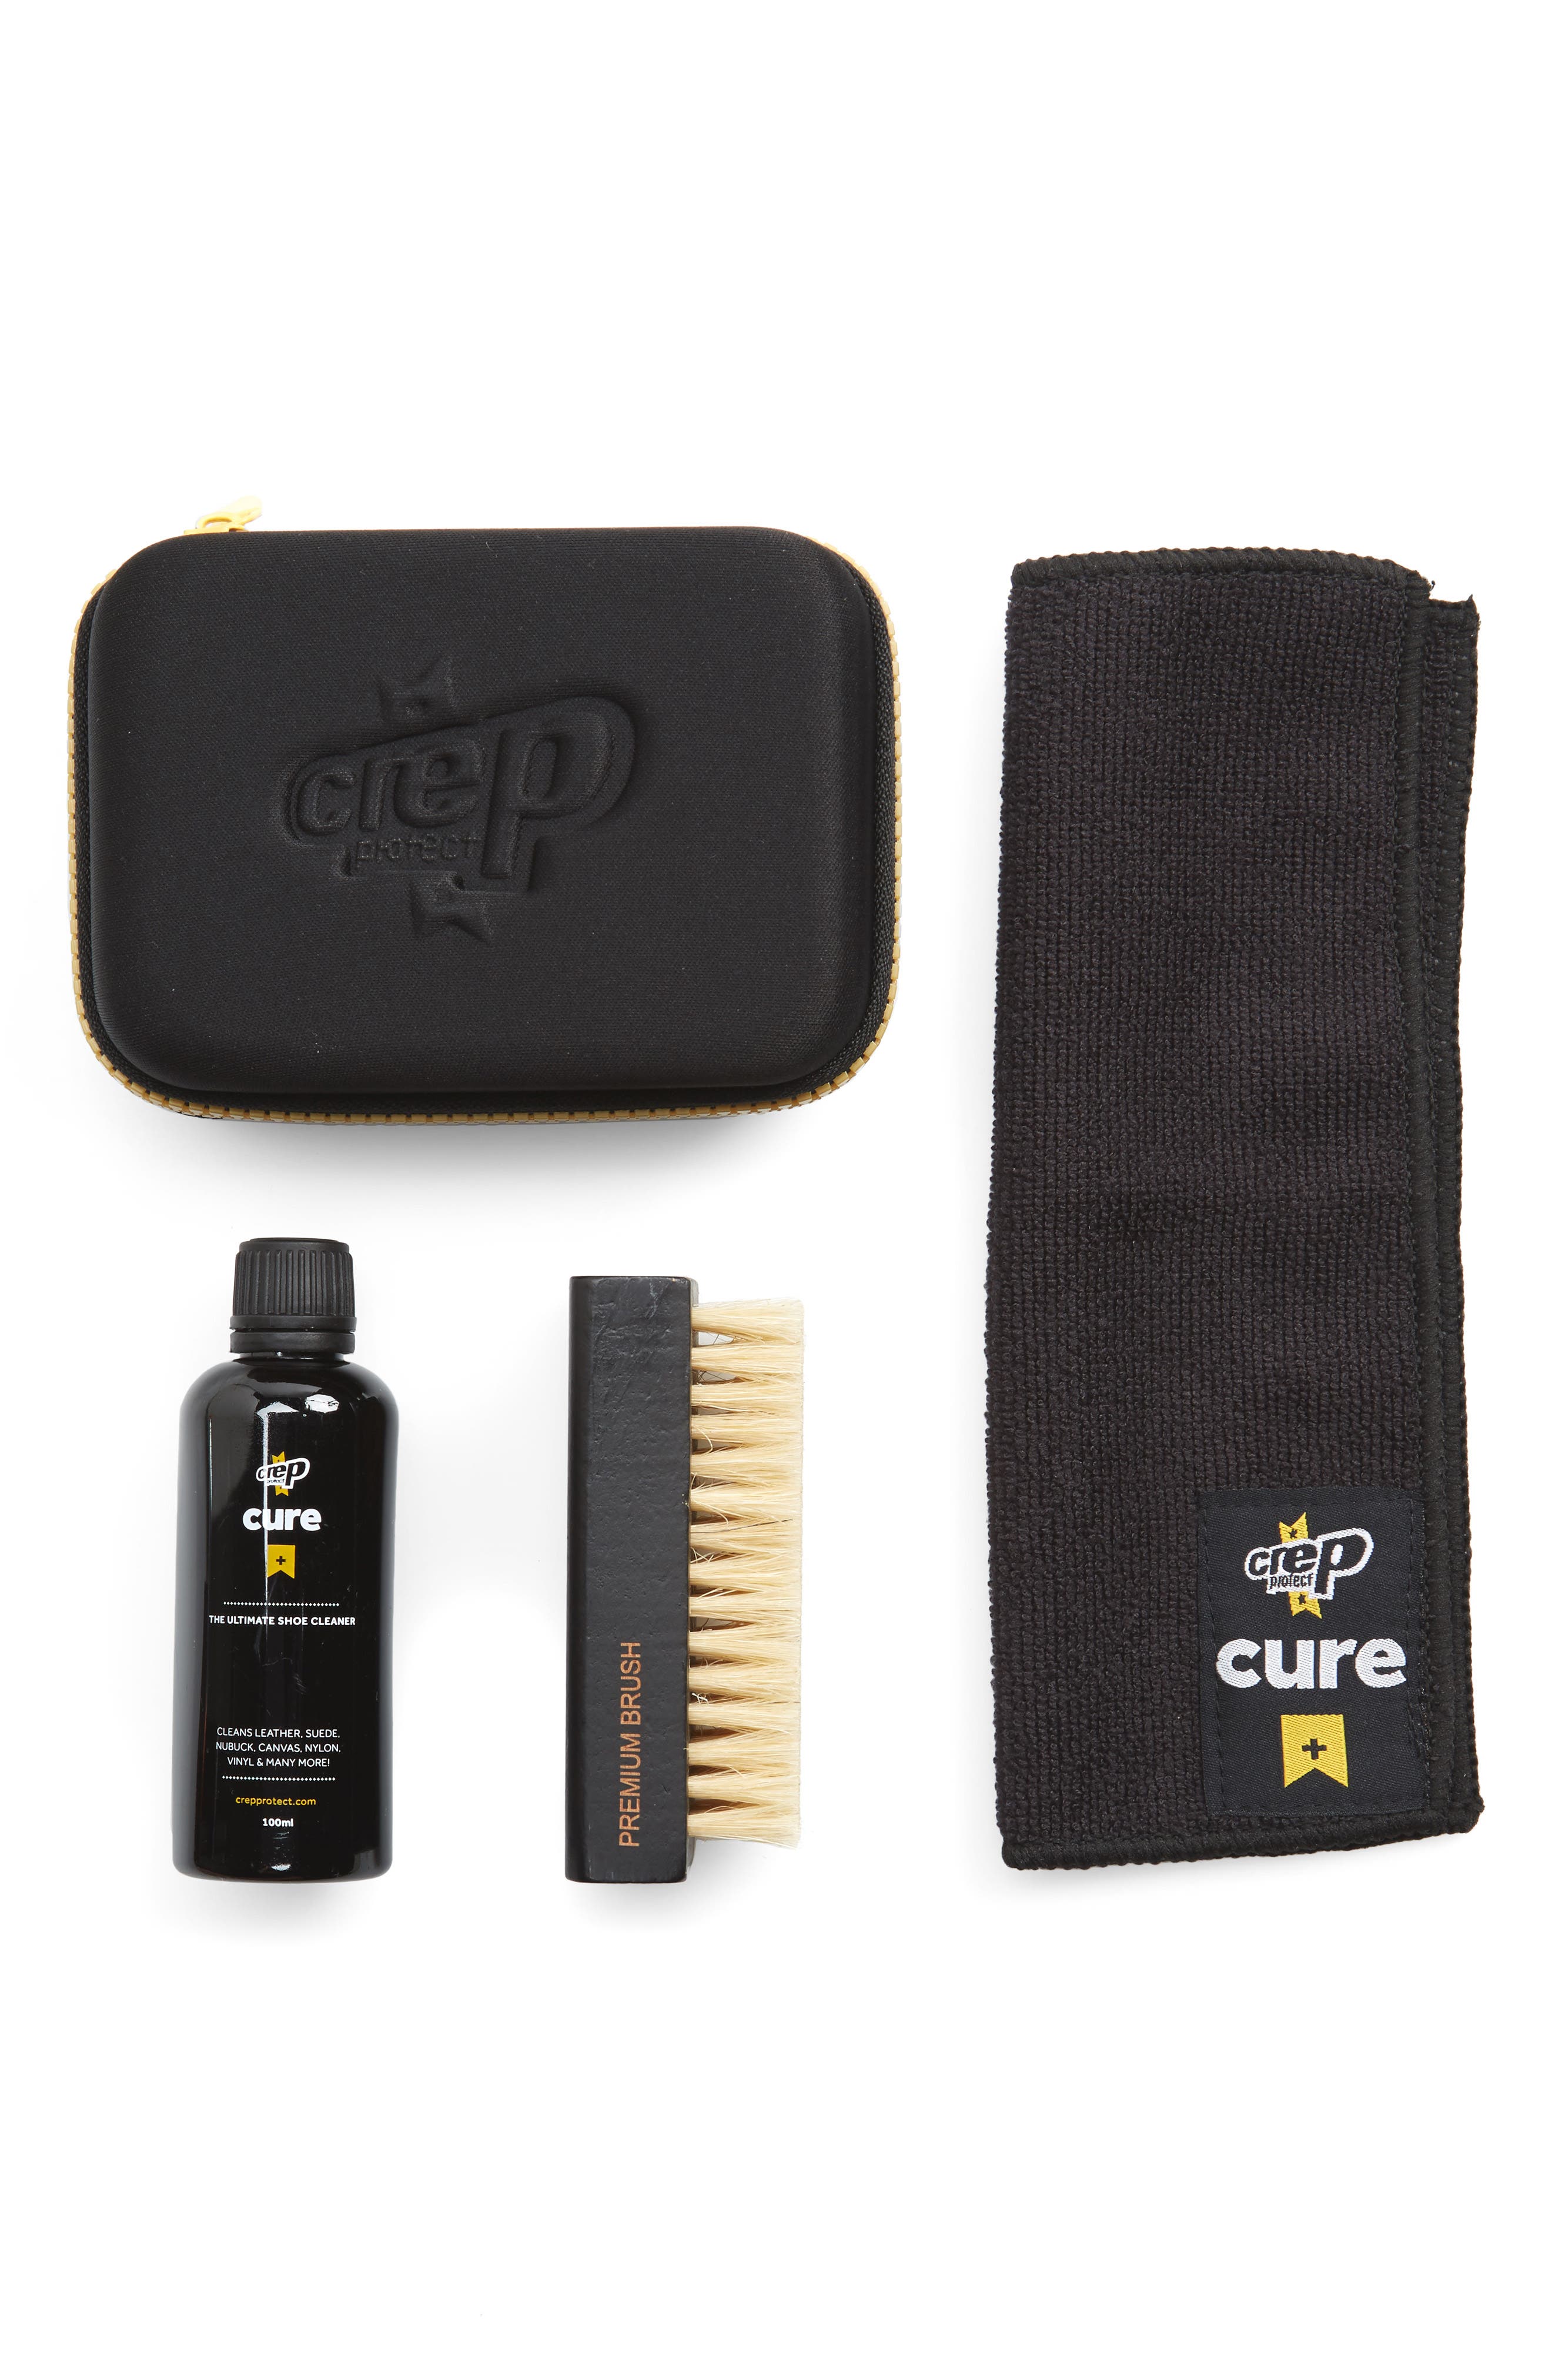 crep cure travel kit